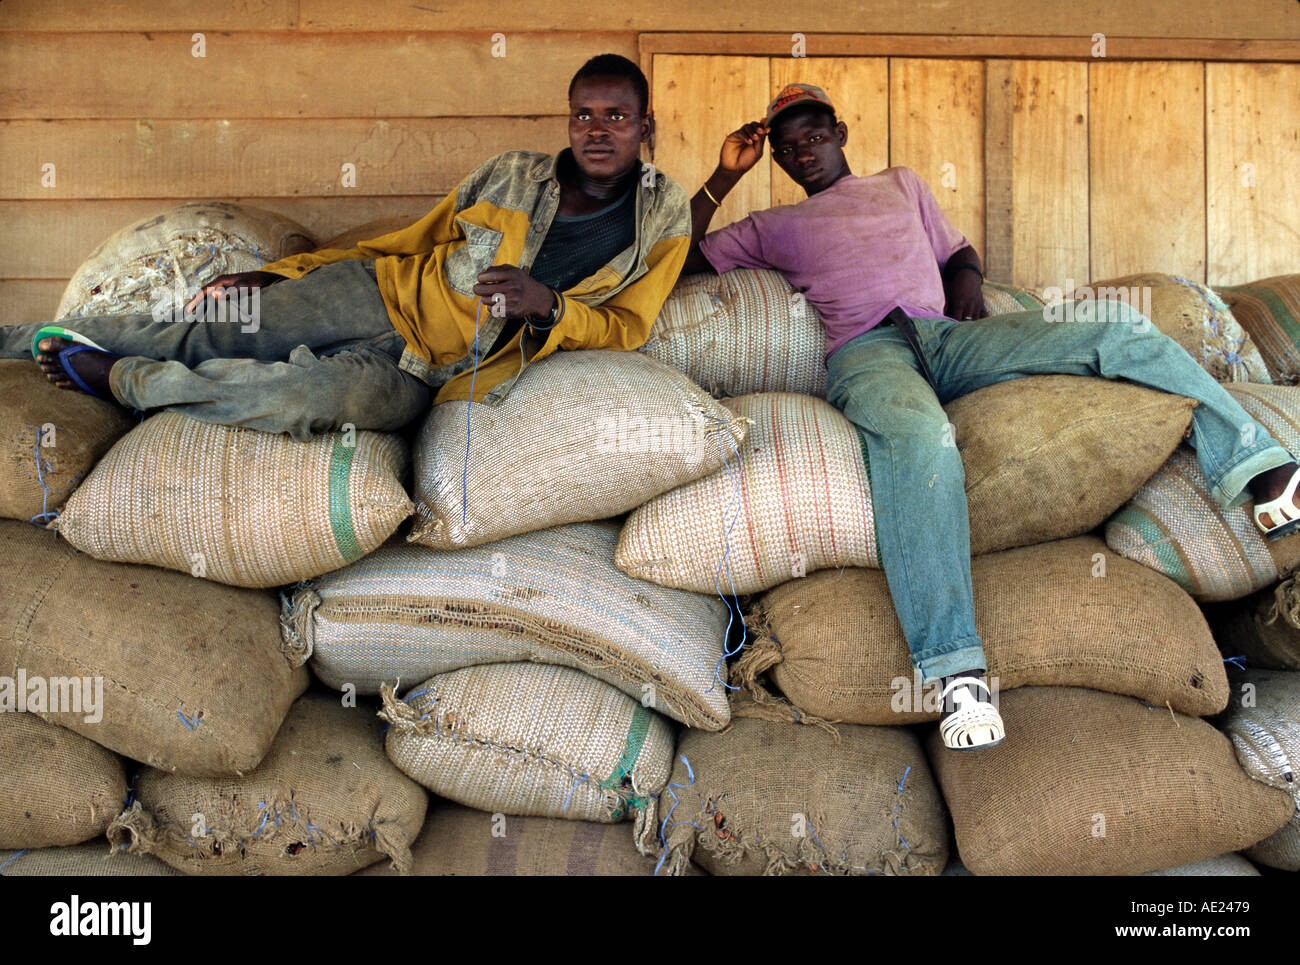 Workers rest on bags of cocoa beans, Ivory Coast Stock Photo